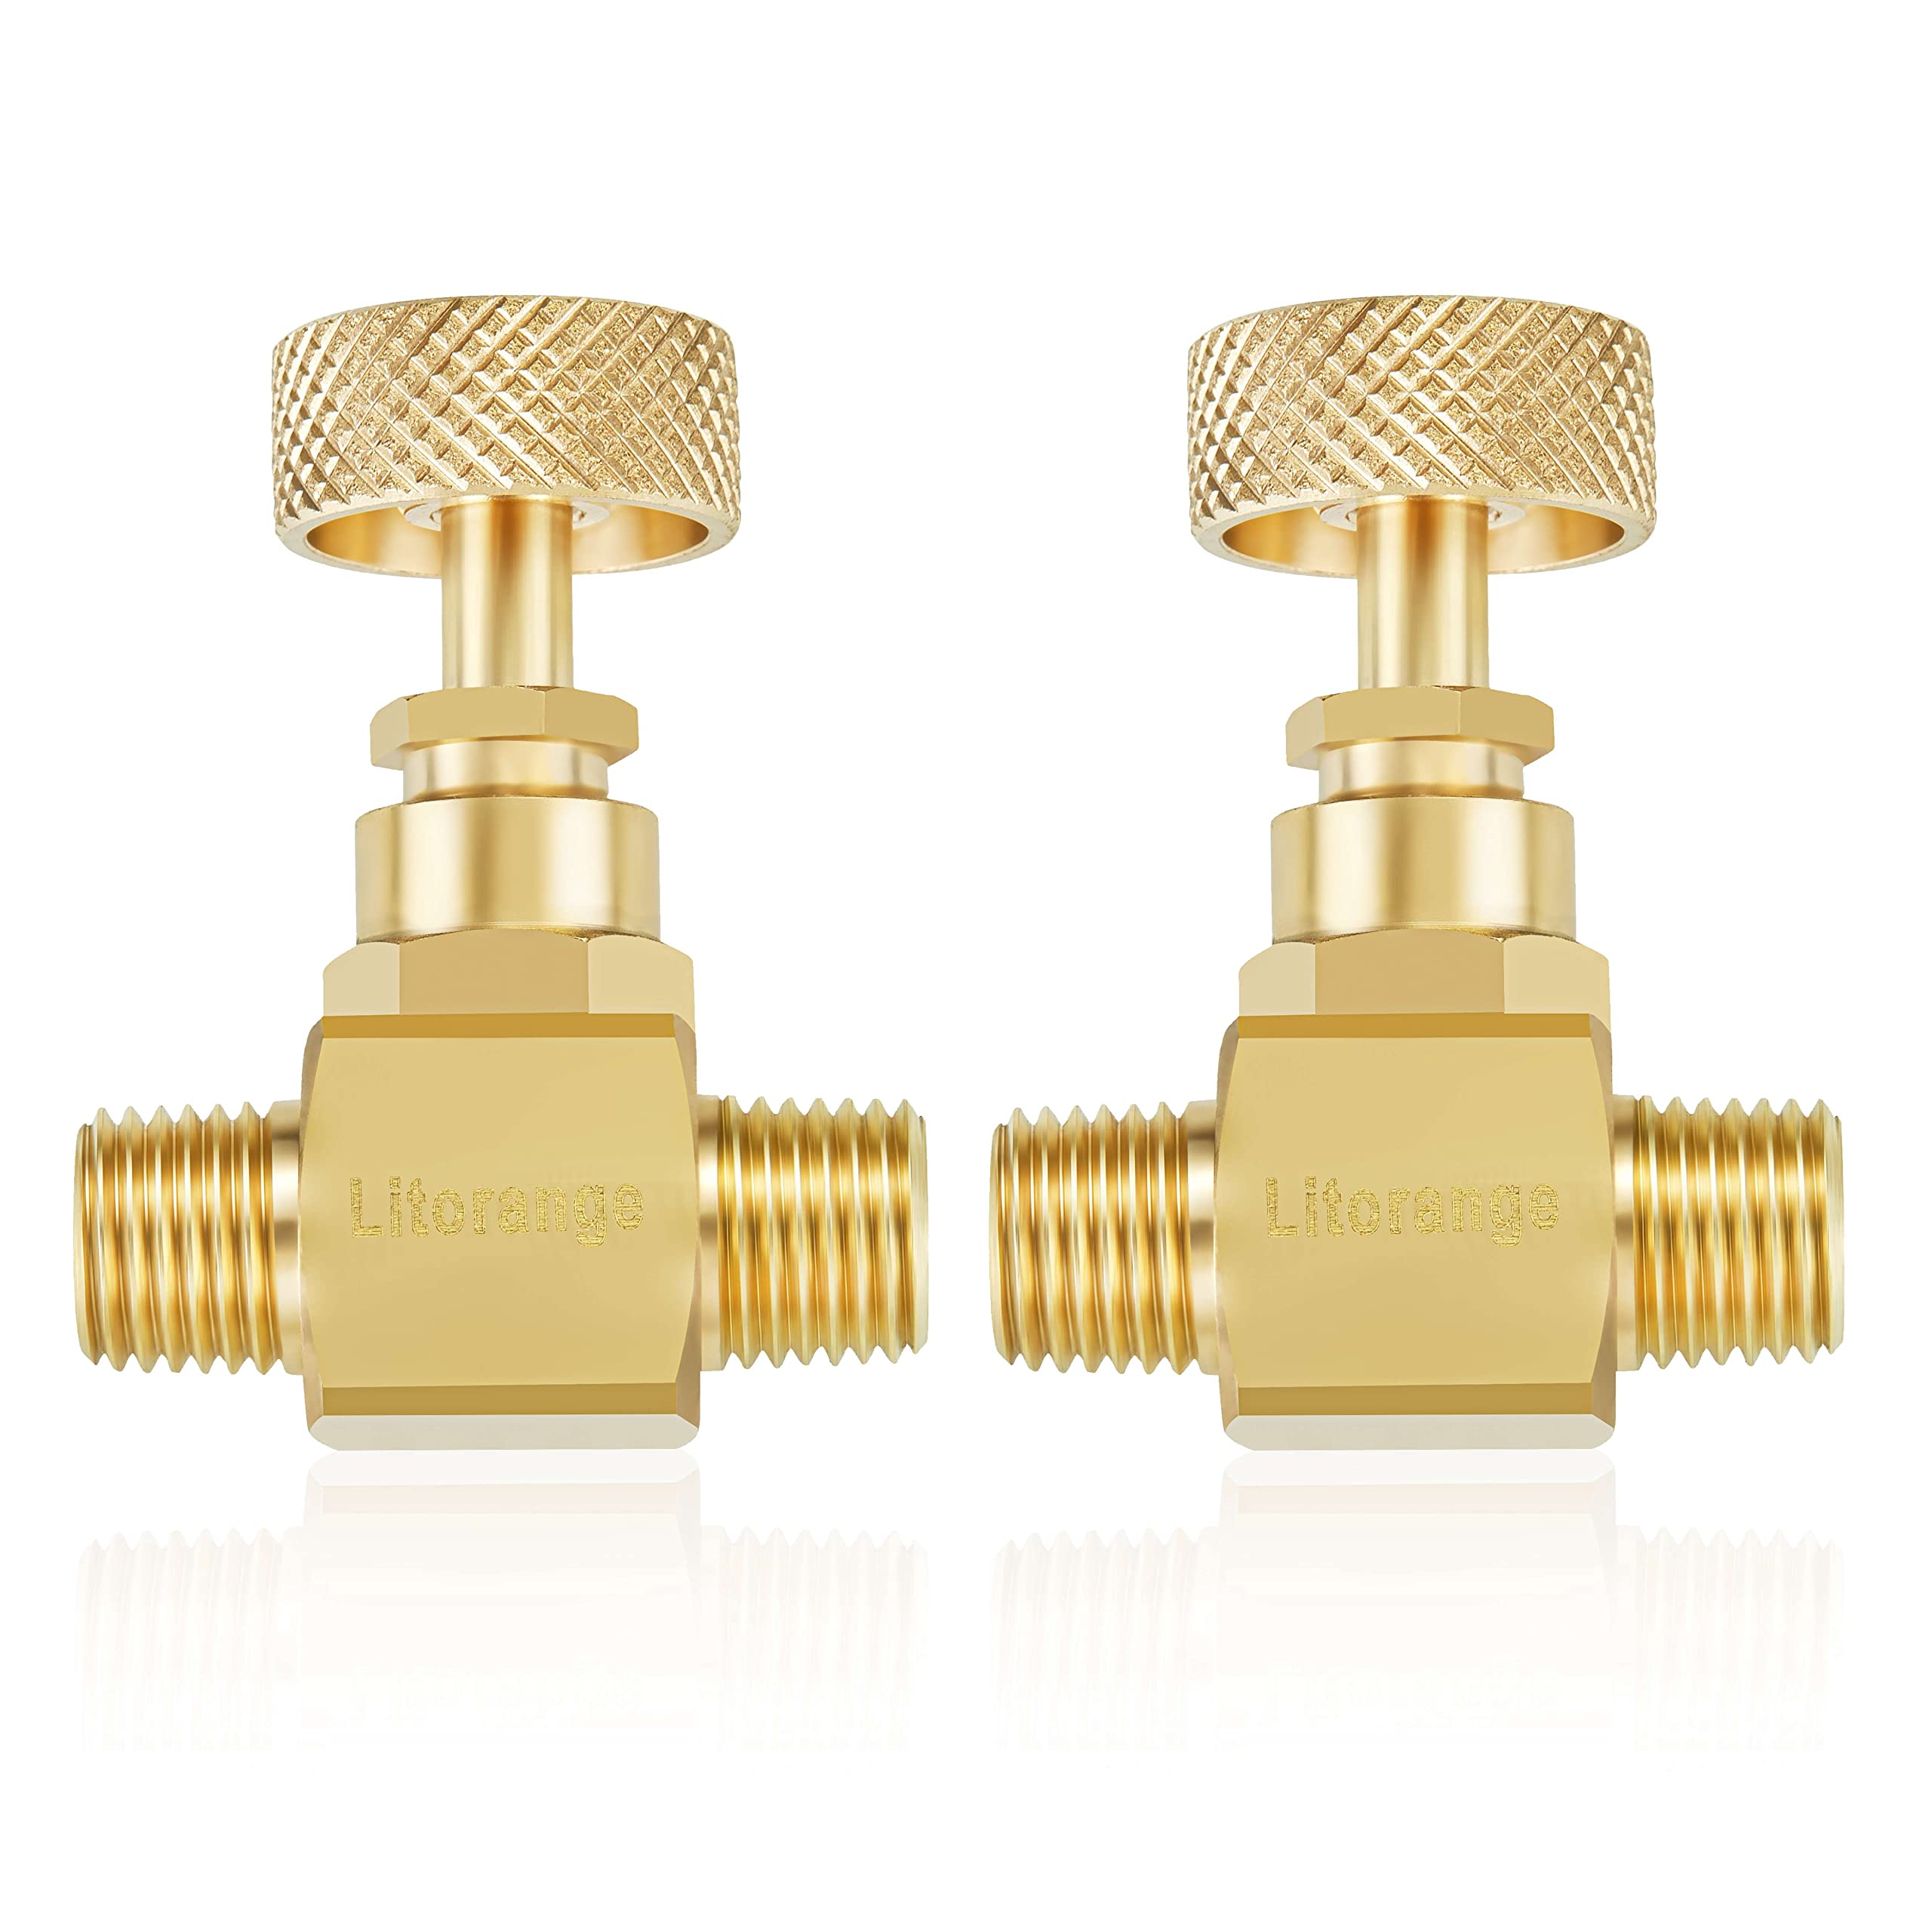 Litorange 2 Pack Heavy Duty Brass Replacement Control Needle Valve 1/4" Male NPT X 1/4" Male NPT Connection